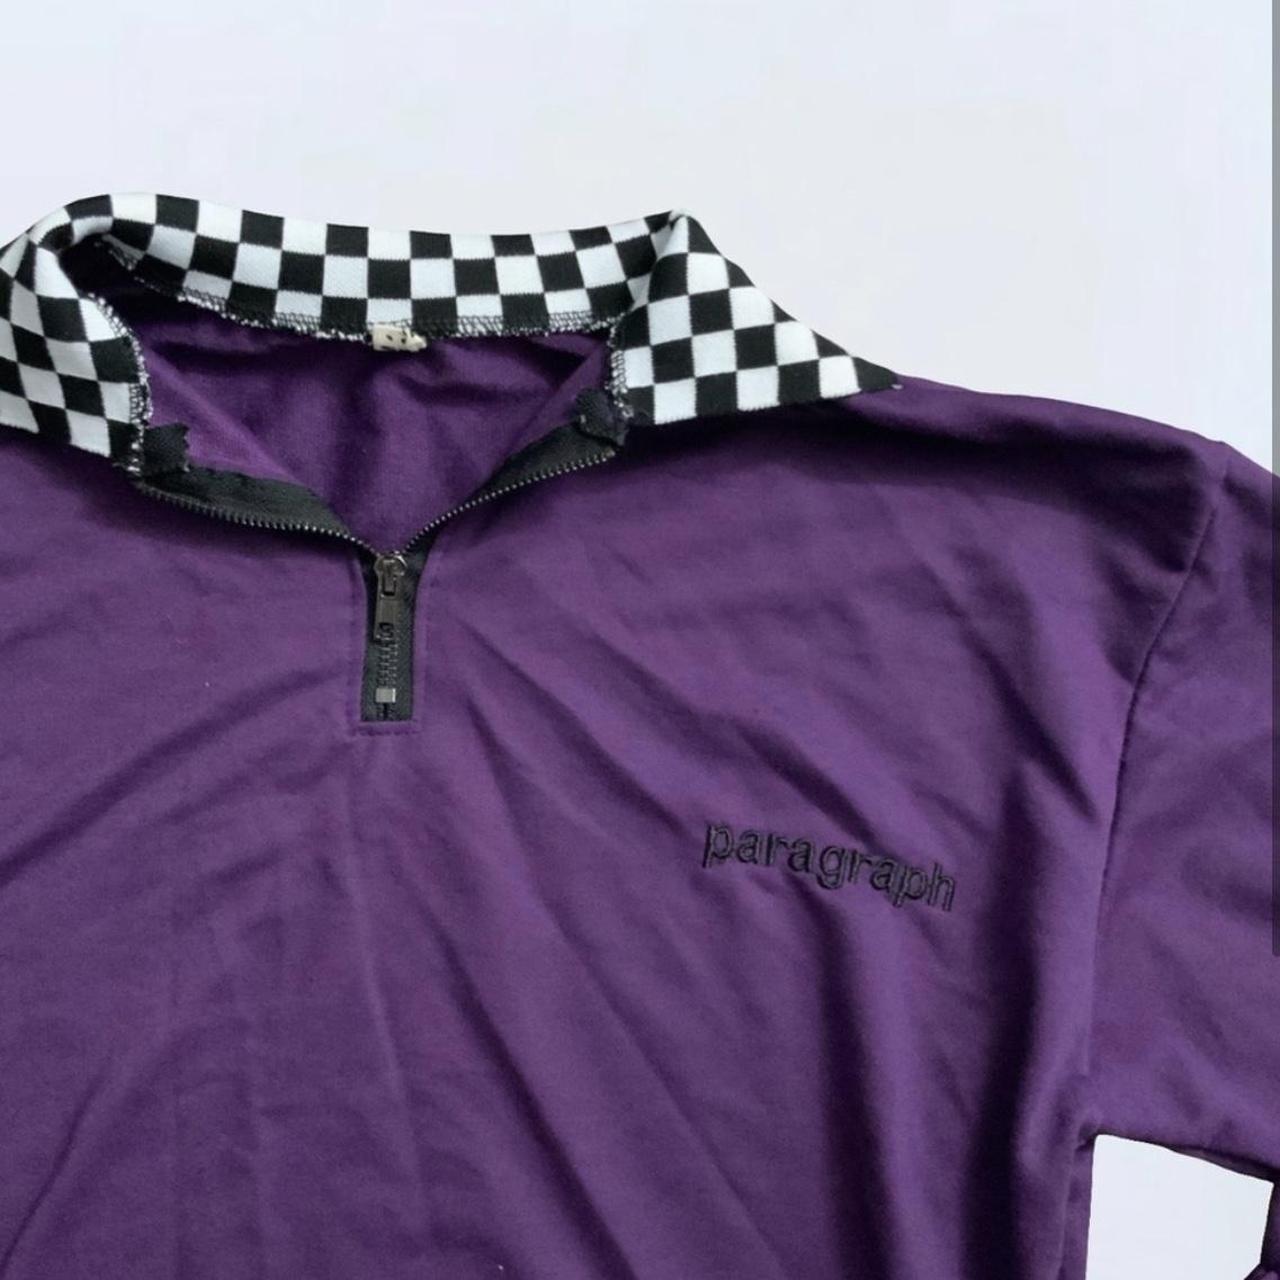 Product Image 2 - Checkered purple sweater from Yesstyle
One